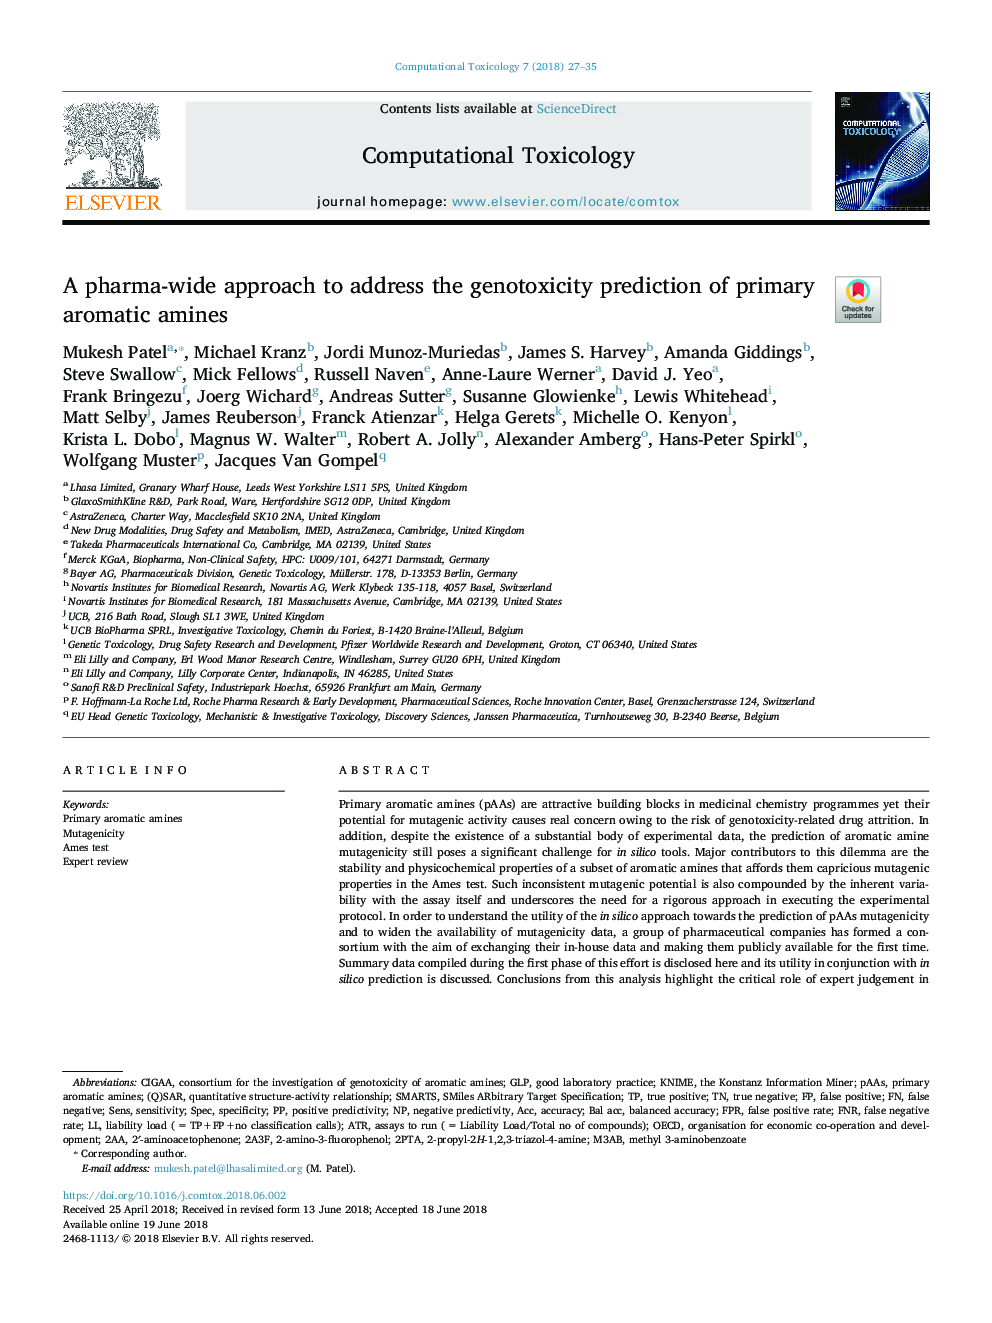 A pharma-wide approach to address the genotoxicity prediction of primary aromatic amines